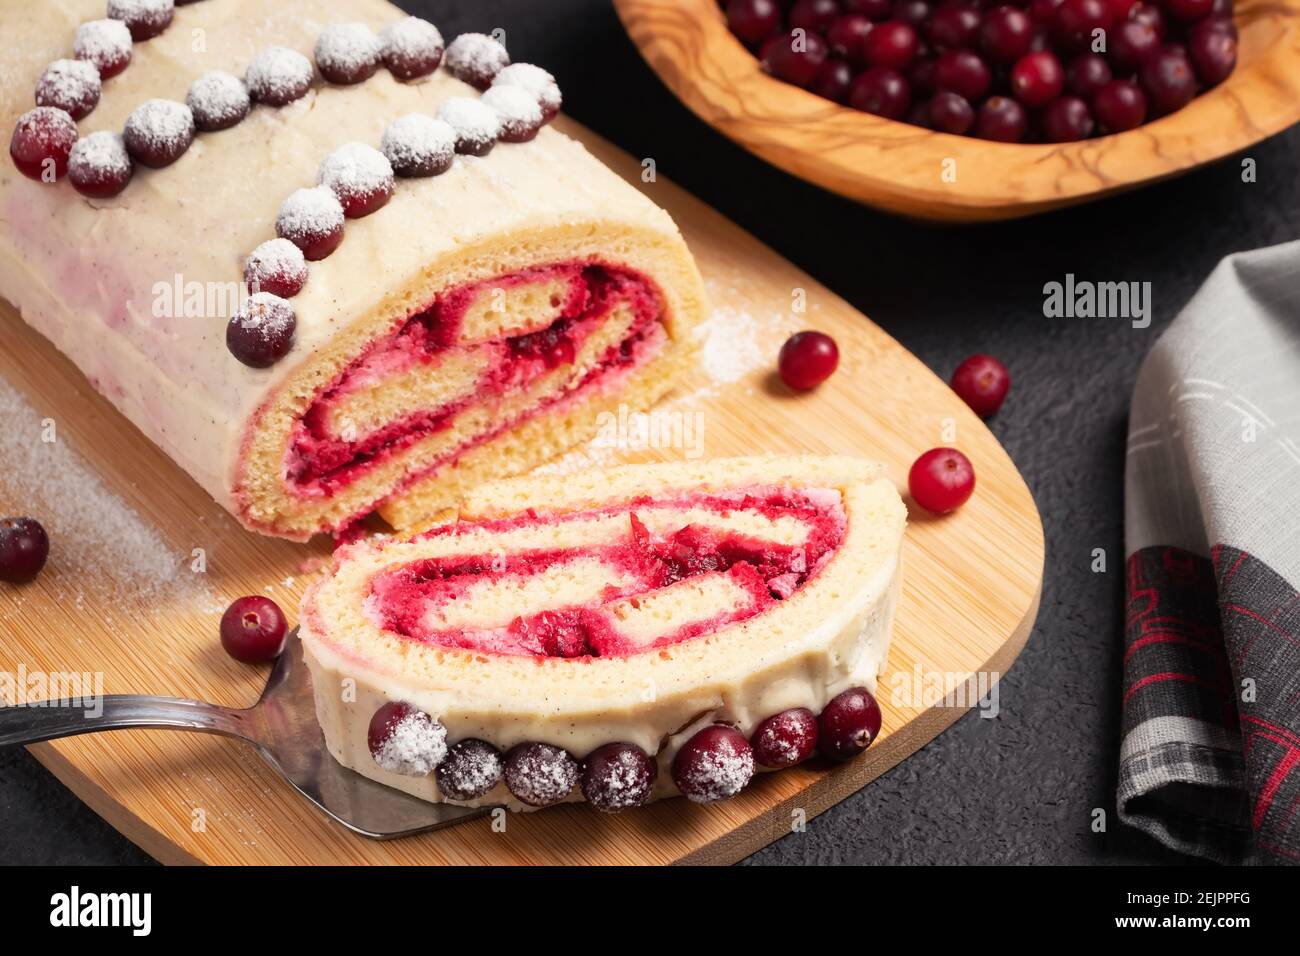 Homemade biscuit sweet roll with cranberries and cream on a black table. Stock Photo